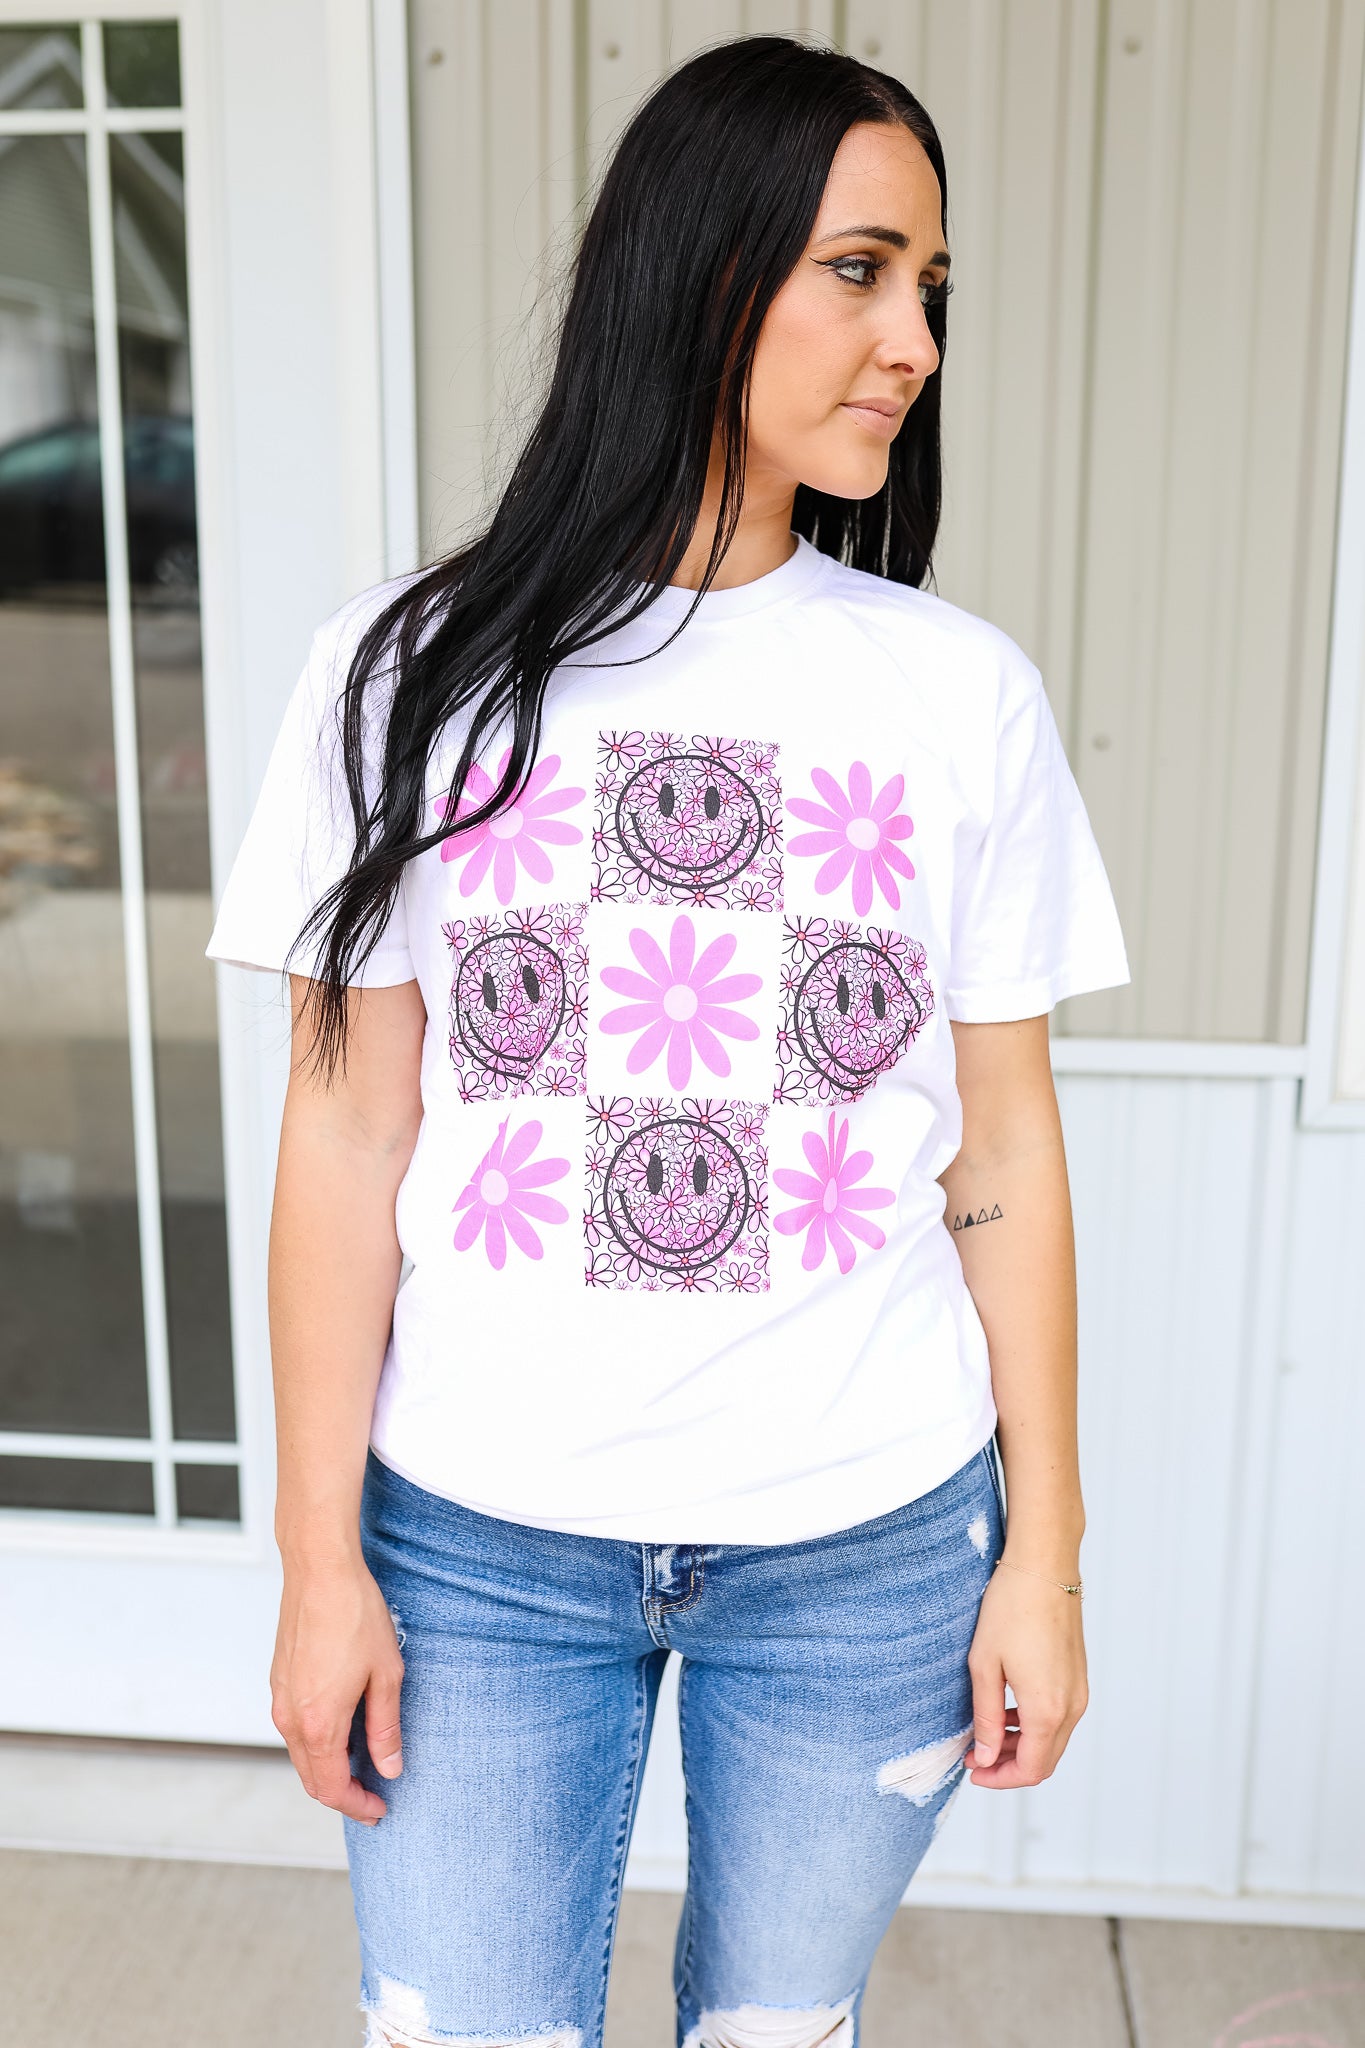 Flower Checker Board Happy Face Graphic Tee - White